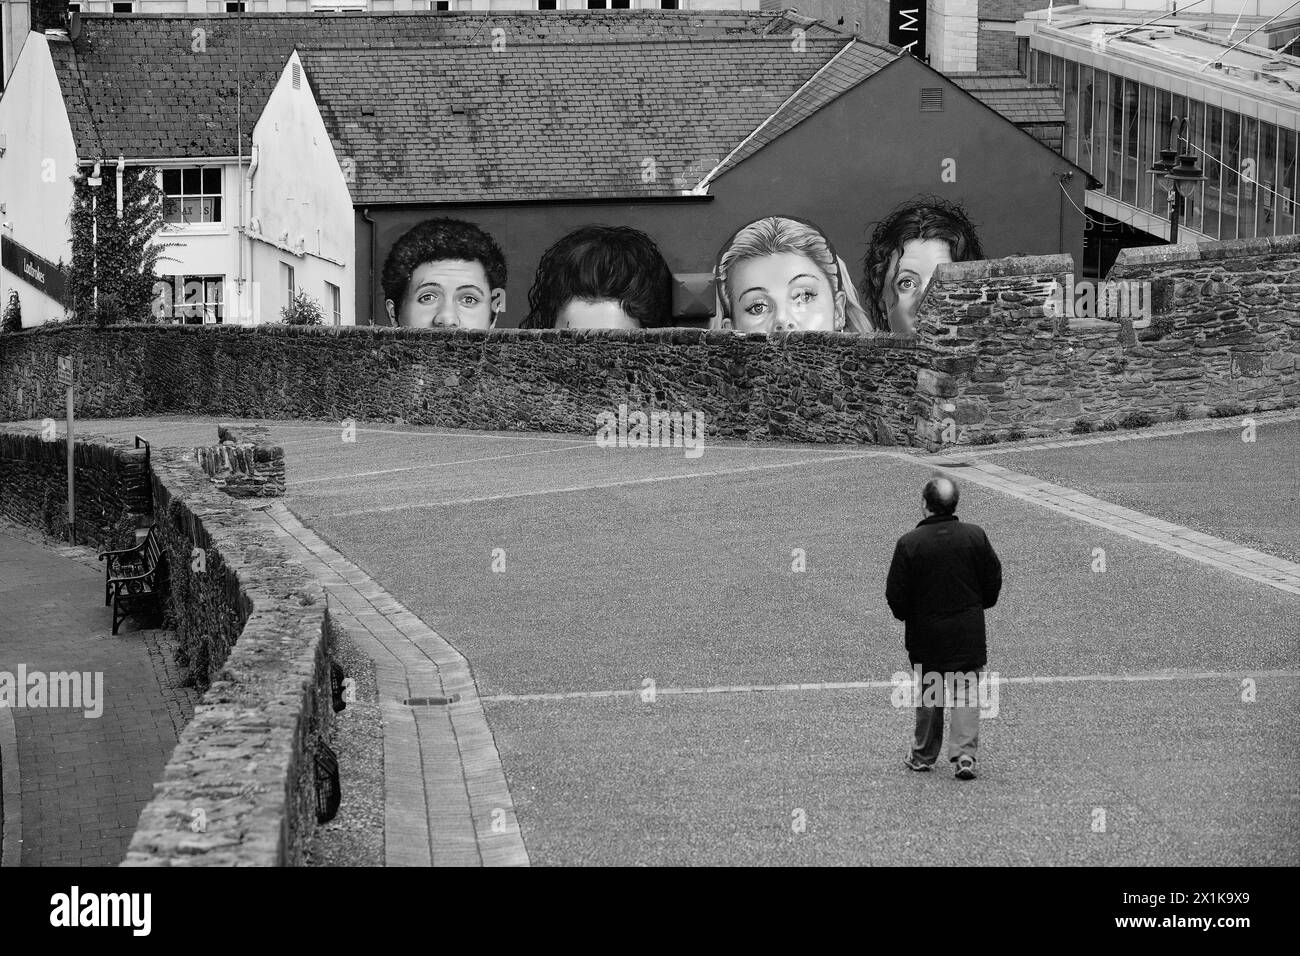 Man walking on the city walls of Derry/Londonderry, Northern Ireland with a mural of the English/Irish TV series mural Derry Girls in the foreground. Stock Photo